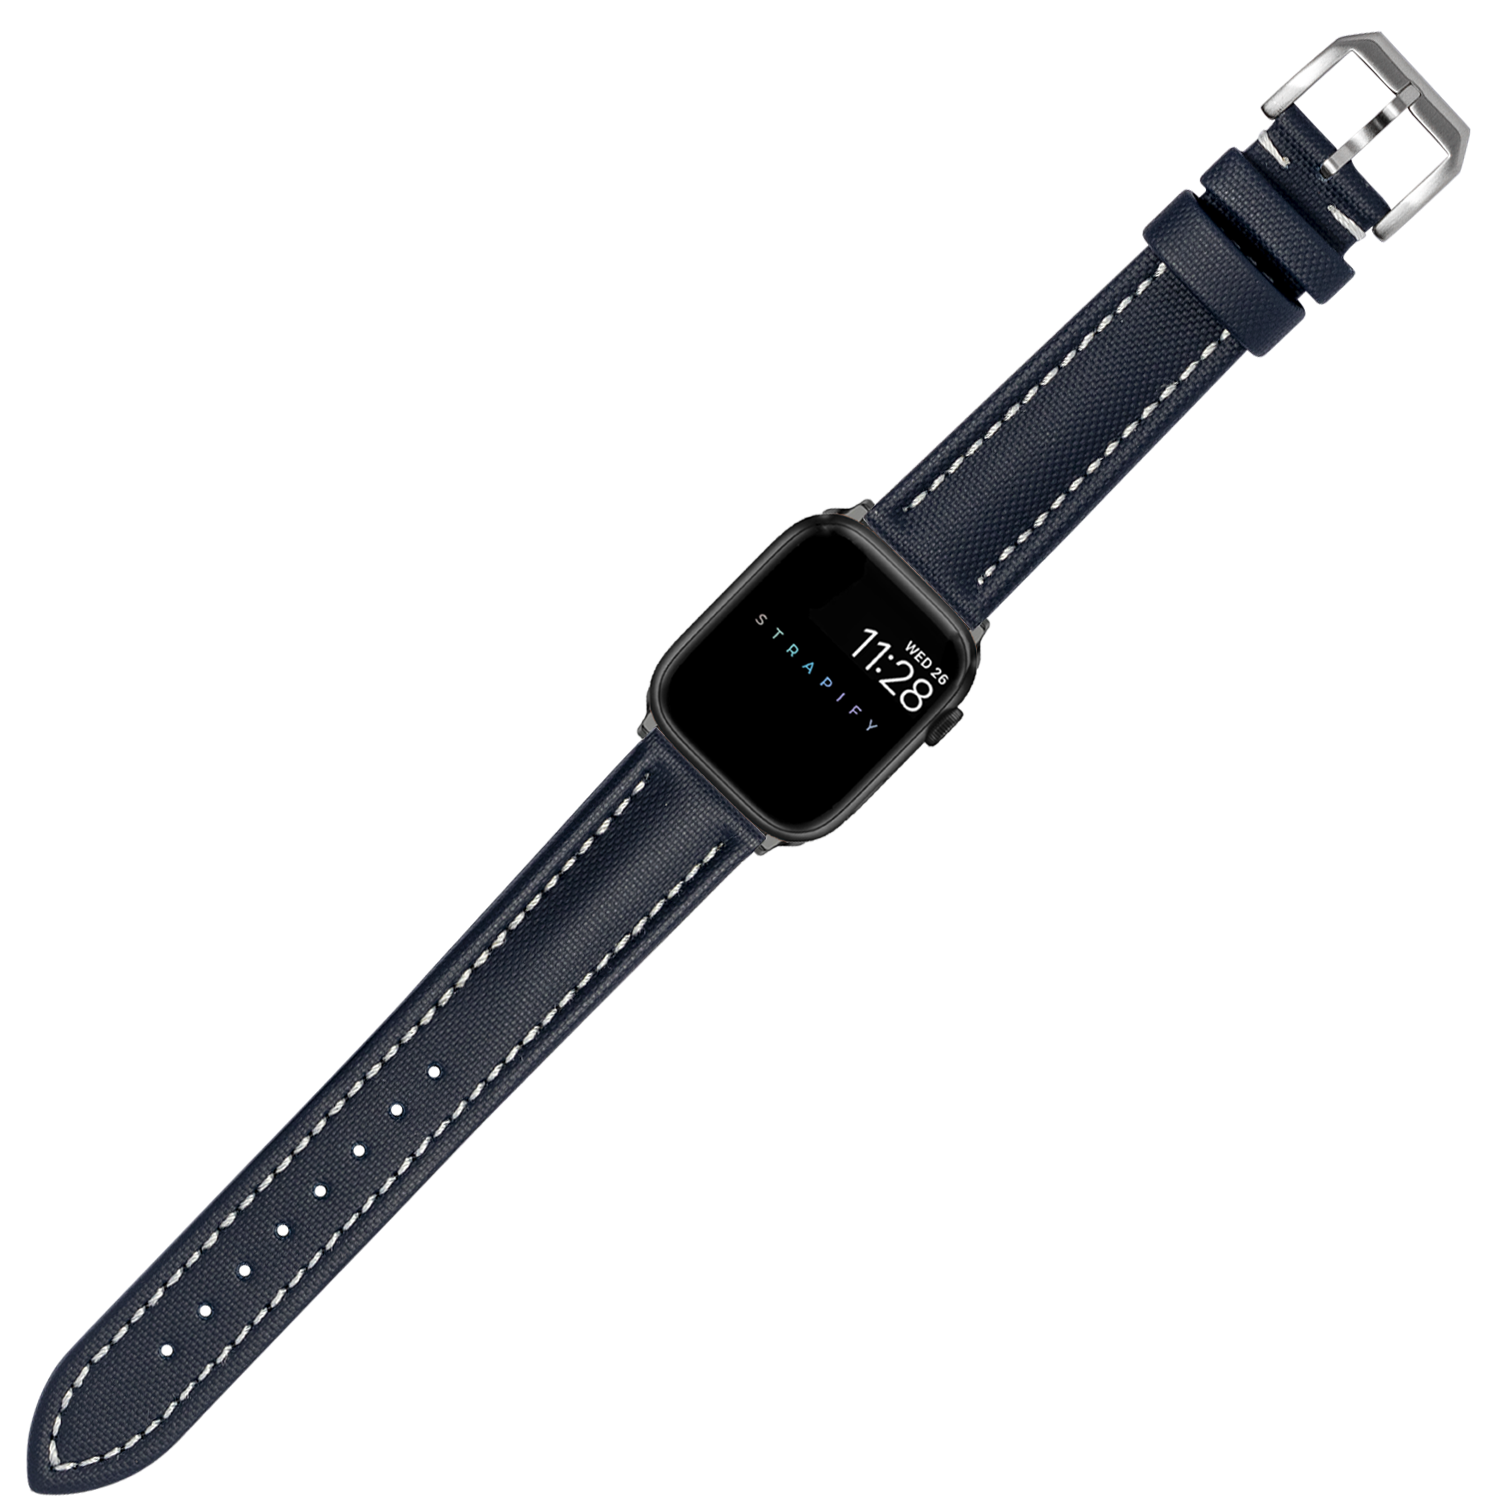 [Apple Watch] King Sailcloth - Navy Blue with White Stitching